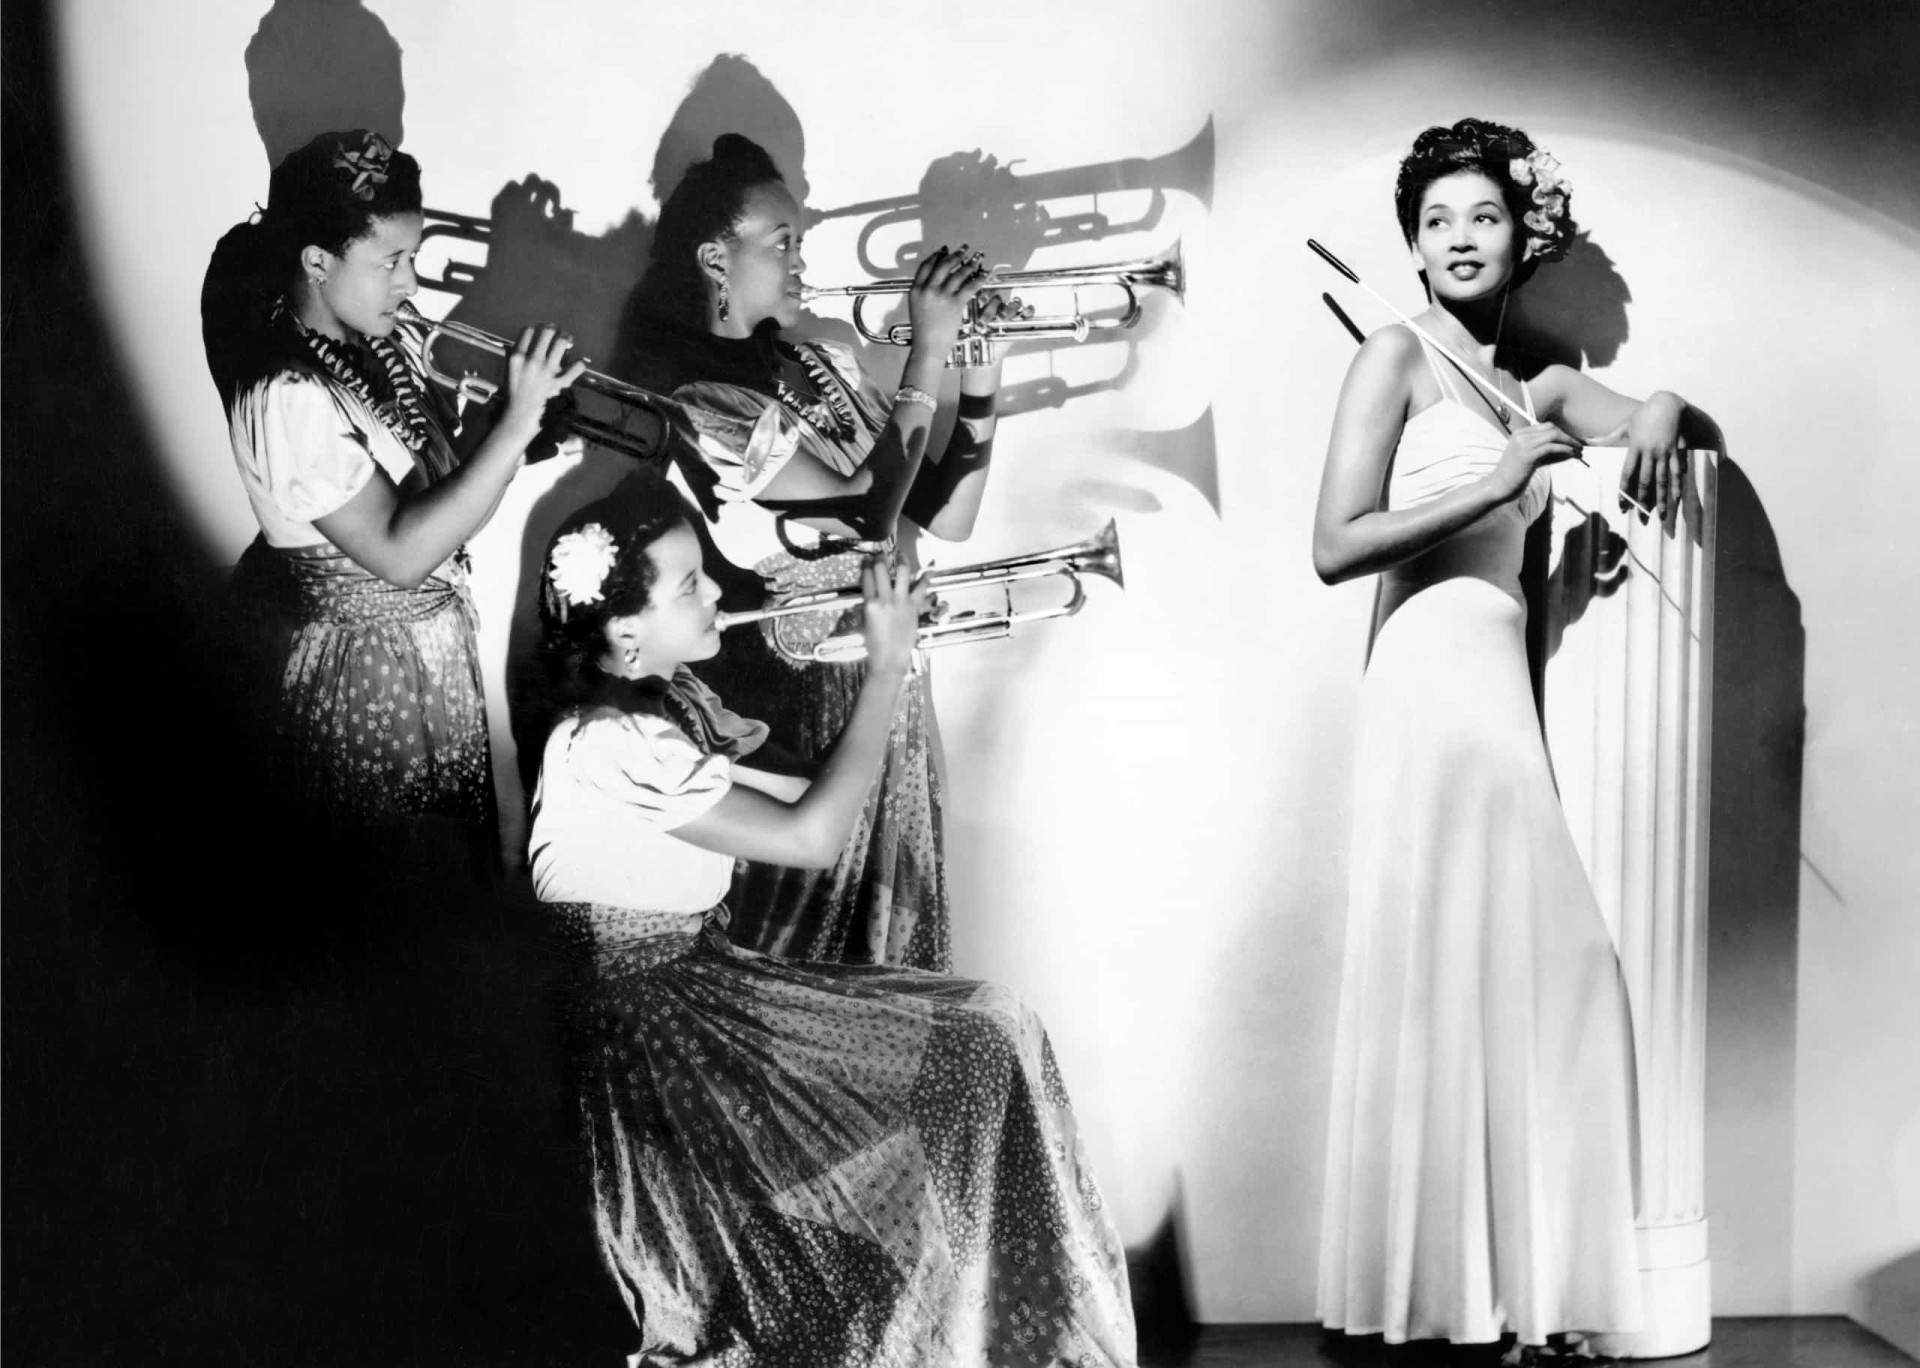 <p>Clora Bryant was one of the premier trumpeters (or <em>trumpetiste</em>, in her own words) of the mid-century Los Angeles jazz scene. She was a frequently featured member of the all-female International Sweethearts of Rhythm (pictured).</p><p>You may also like:<a href="https://www.starsinsider.com/n/461223?utm_source=msn.com&utm_medium=display&utm_campaign=referral_description&utm_content=507986v1en-sg"> Celebrities who completely rebranded themselves</a></p>